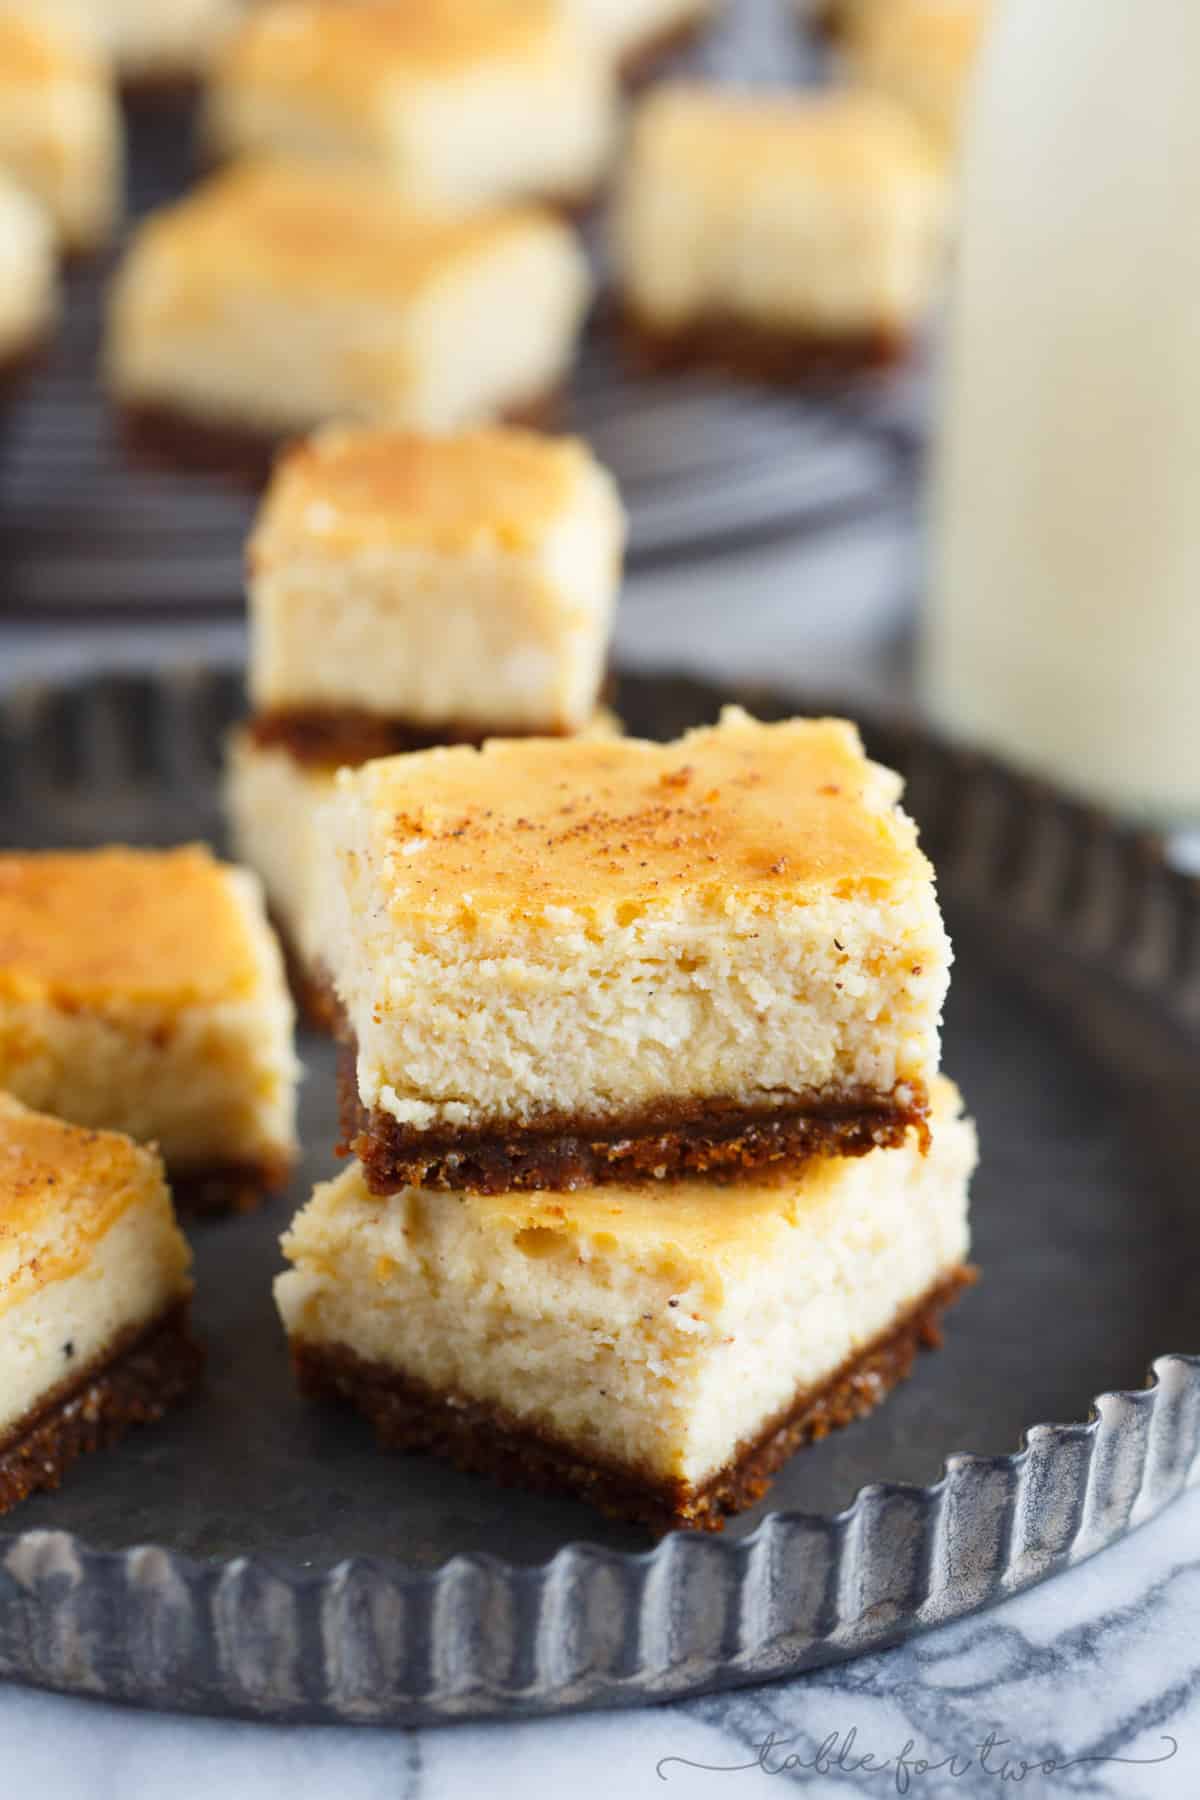 These adorable eggnog cheesecake bites with gingersnap crust are the perfect little addition to your holiday table! These little bites will be gone before you know it!